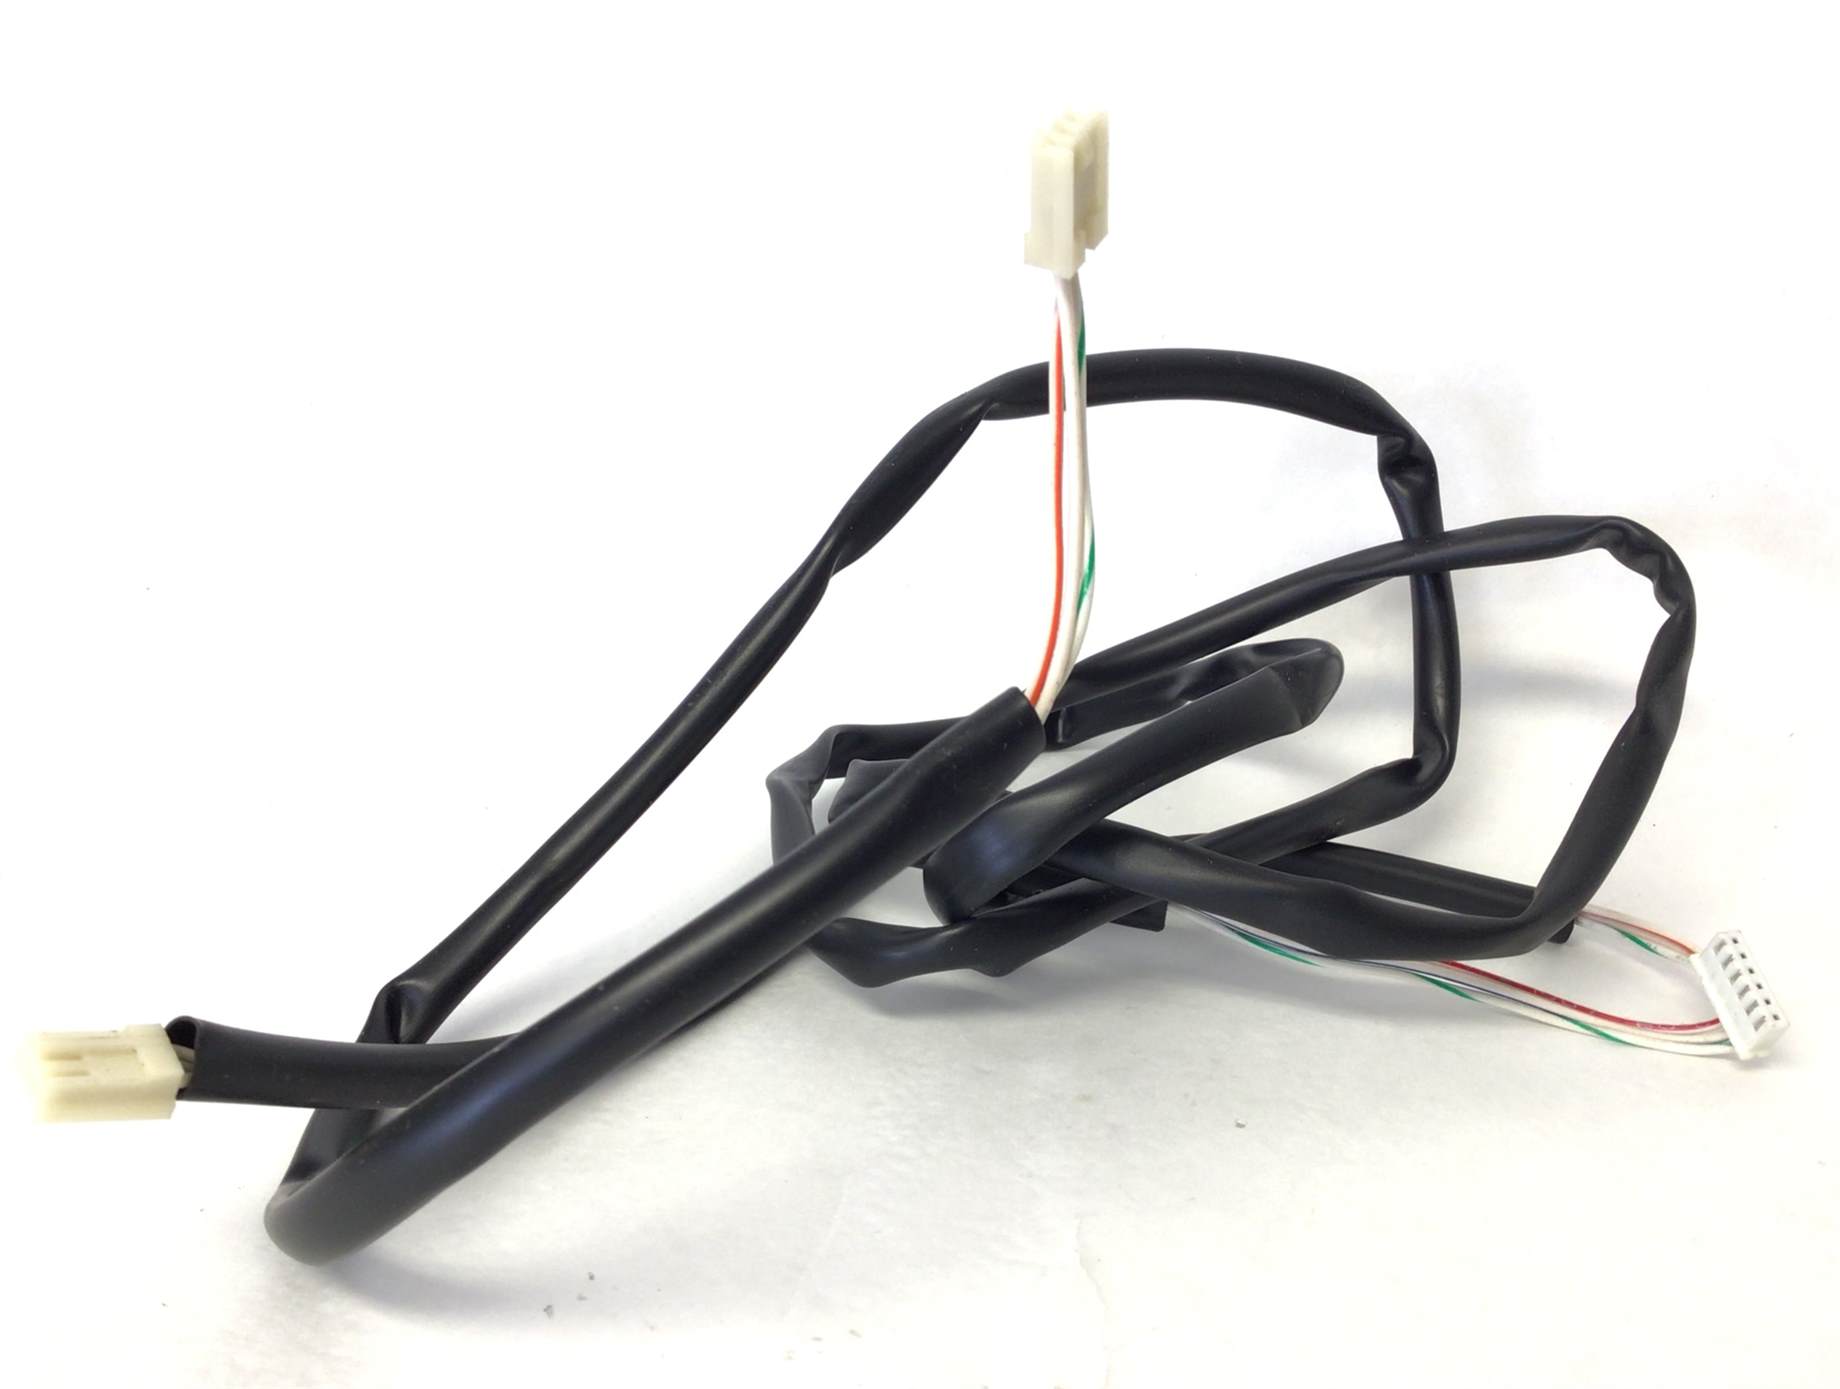 Opto Reed Switch RPM Sensor Wire Harness (Used)